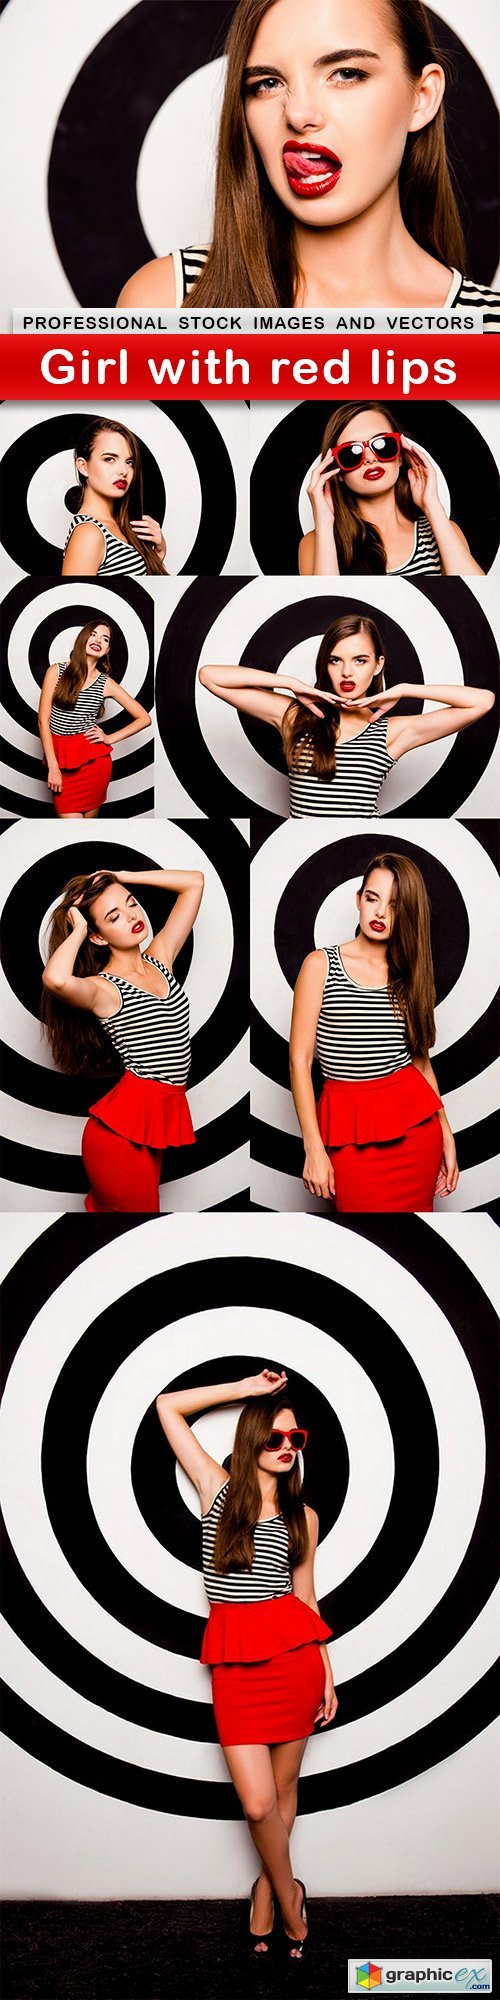 Girl with red lips - 8 UHQ JPEG